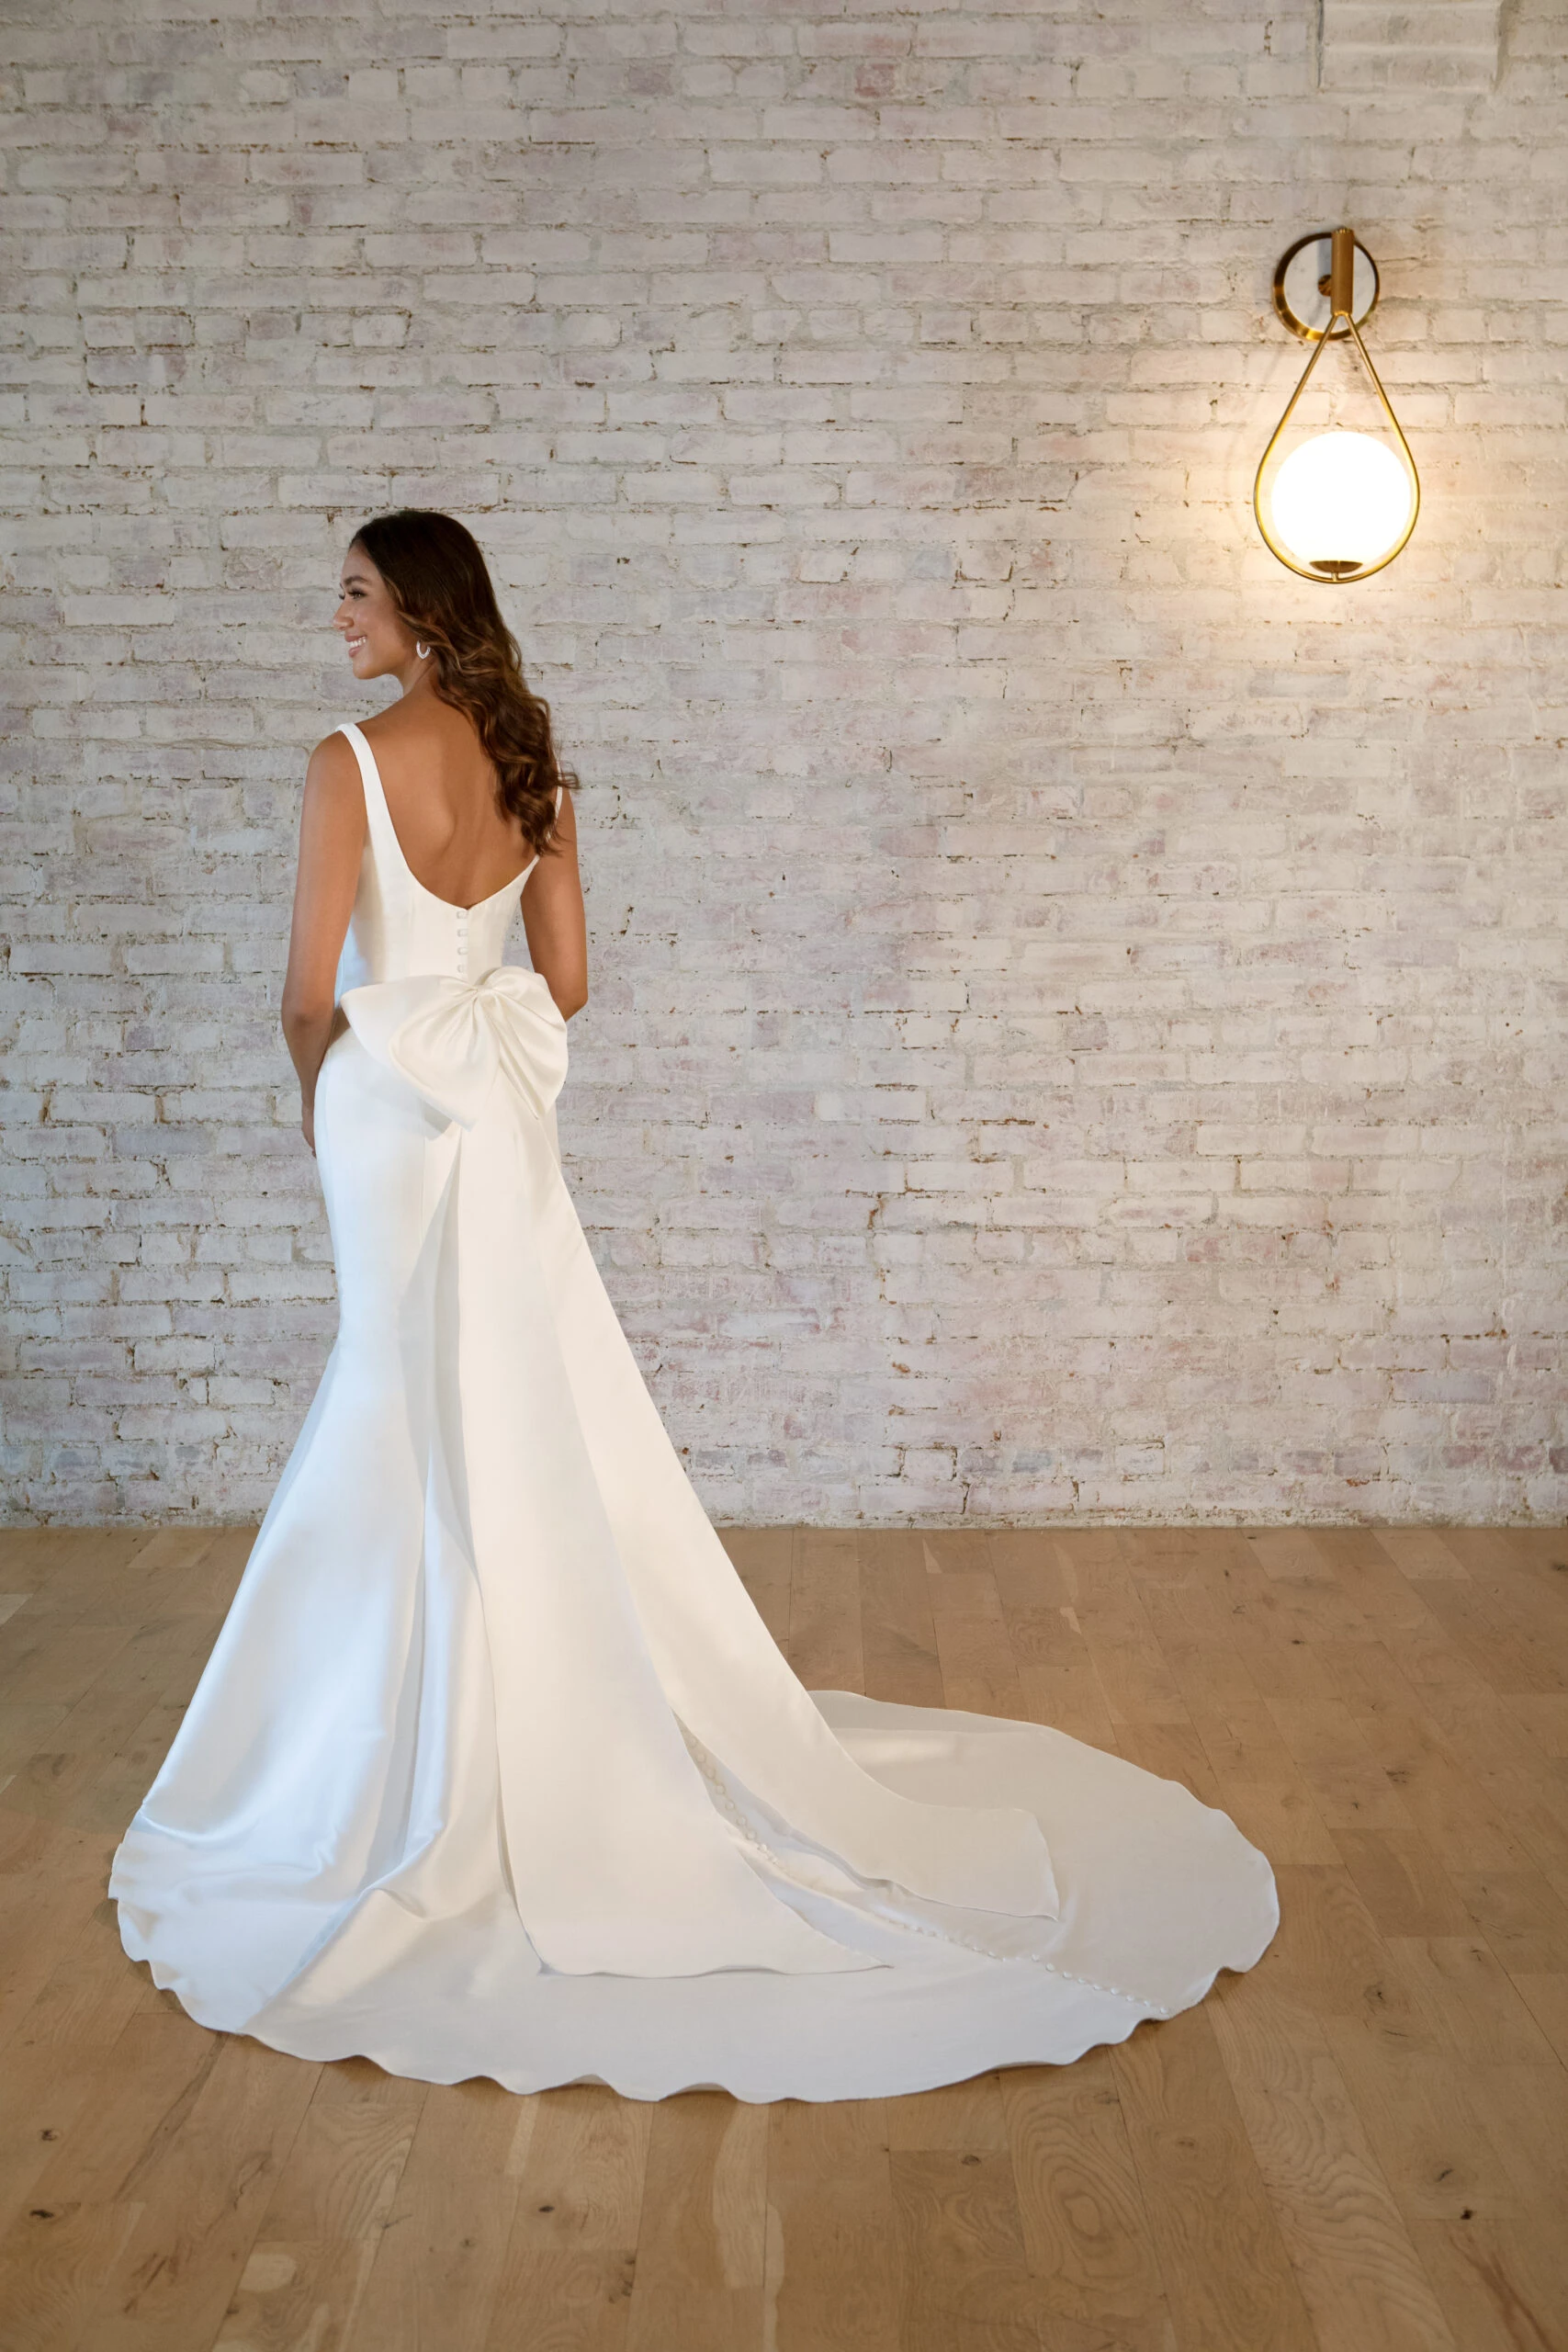 simple fit-anf-flare wedding dress with low back and detachable bow - 7557 by Stella York